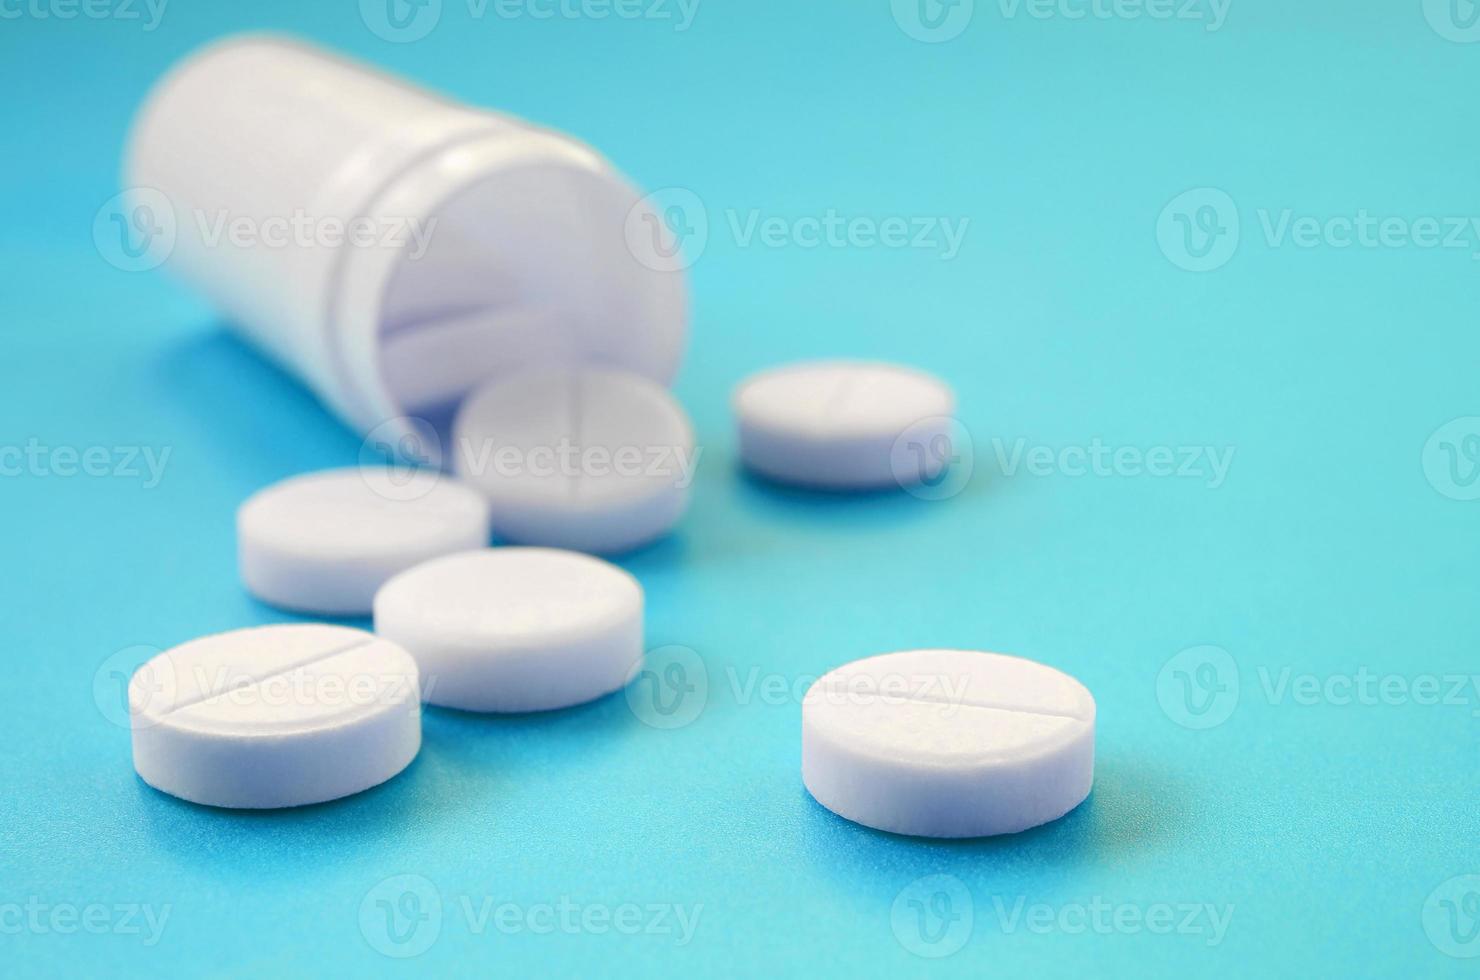 Several white tablets fall out of the plastic jar on the blue surface. Background image on medical and pharmaceutical topics photo